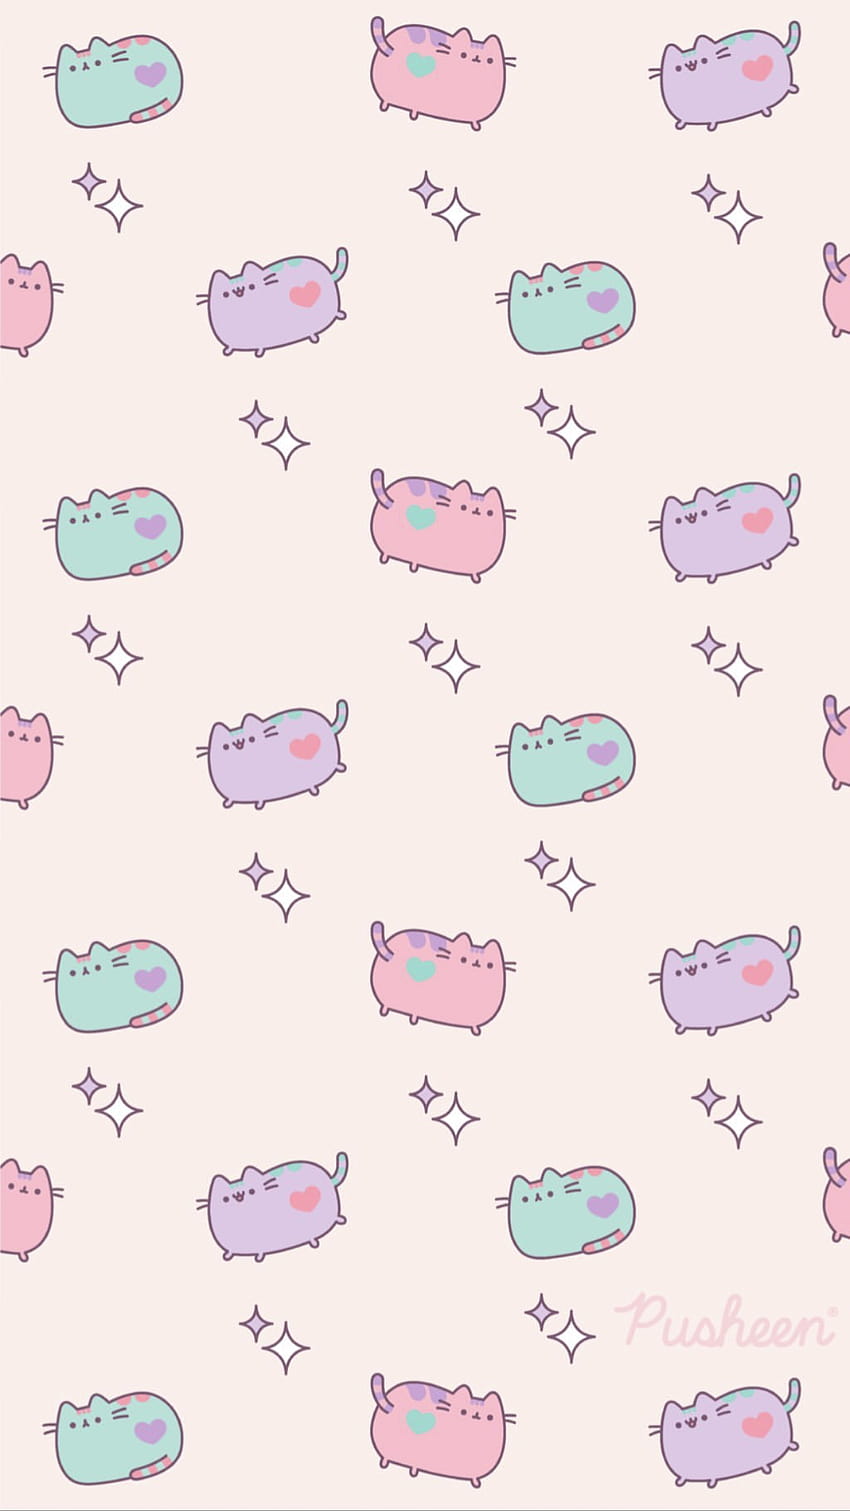 iPhone : Pusheen the cat floral pastels spring iphone, cartoon spring cats HD phone wallpaper